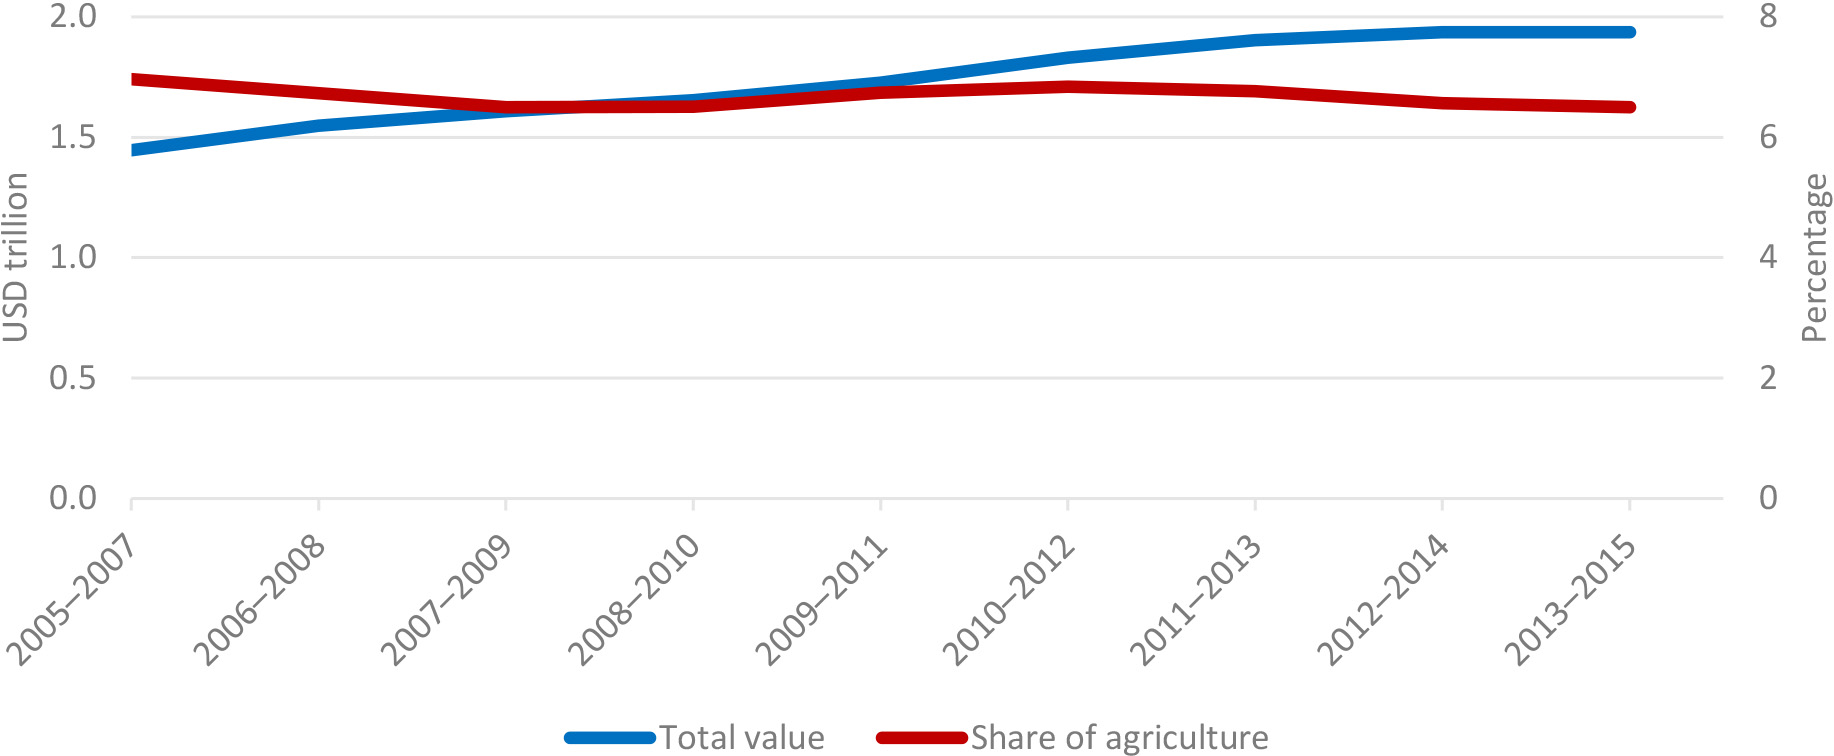 Value of the food value chain value and average share of agriculture using the FAAFH measure. Source: FAO. 2022. FAOSTAT: Industry and primary factors decomposition. In: FAO. Rome. Cited October 2022. https://www.fao.org/faostat/en/#data/GFDI.